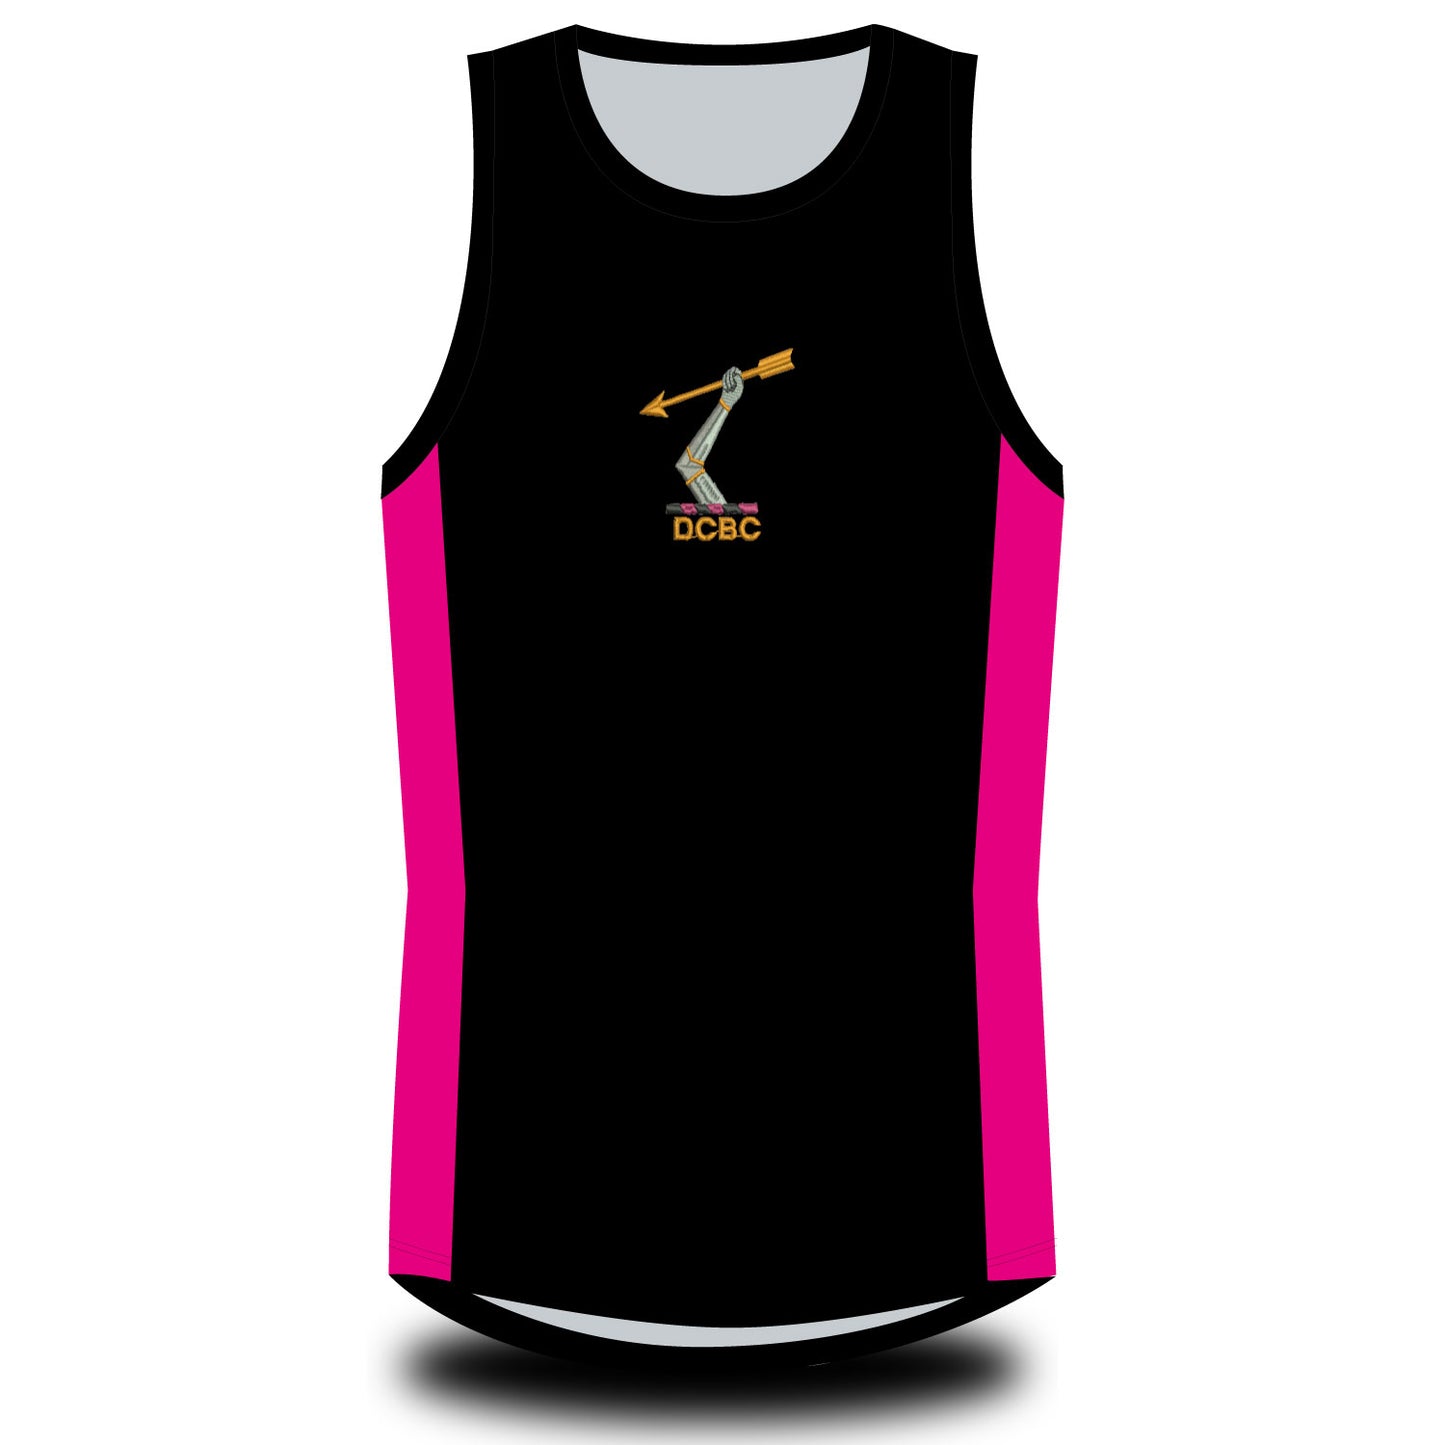 Downing College Sublimated Vest